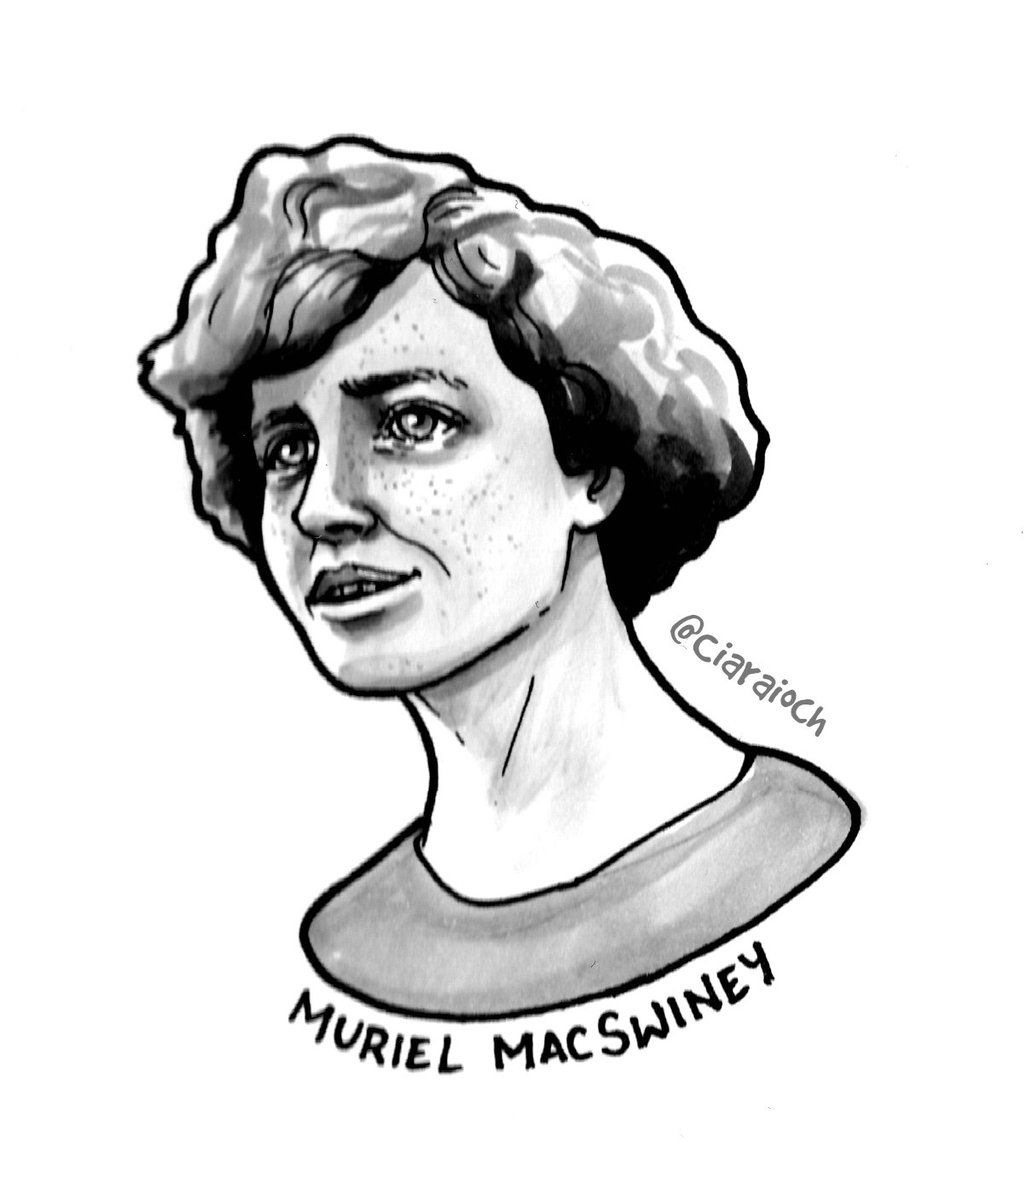  #MiniMná 23 is Muriel MacSwiney. A complicated figure, she shunned her wealthy upbringing for nationalism, broke Annie Smithson out of jail, and spoke in the US after her husband died on hunger strike. (For more, see this  @irishhistory episode:  https://irishhistorypodcast.ie/a-revolutionary-life-muriel-macswiney-part-i/)  #Mnávember